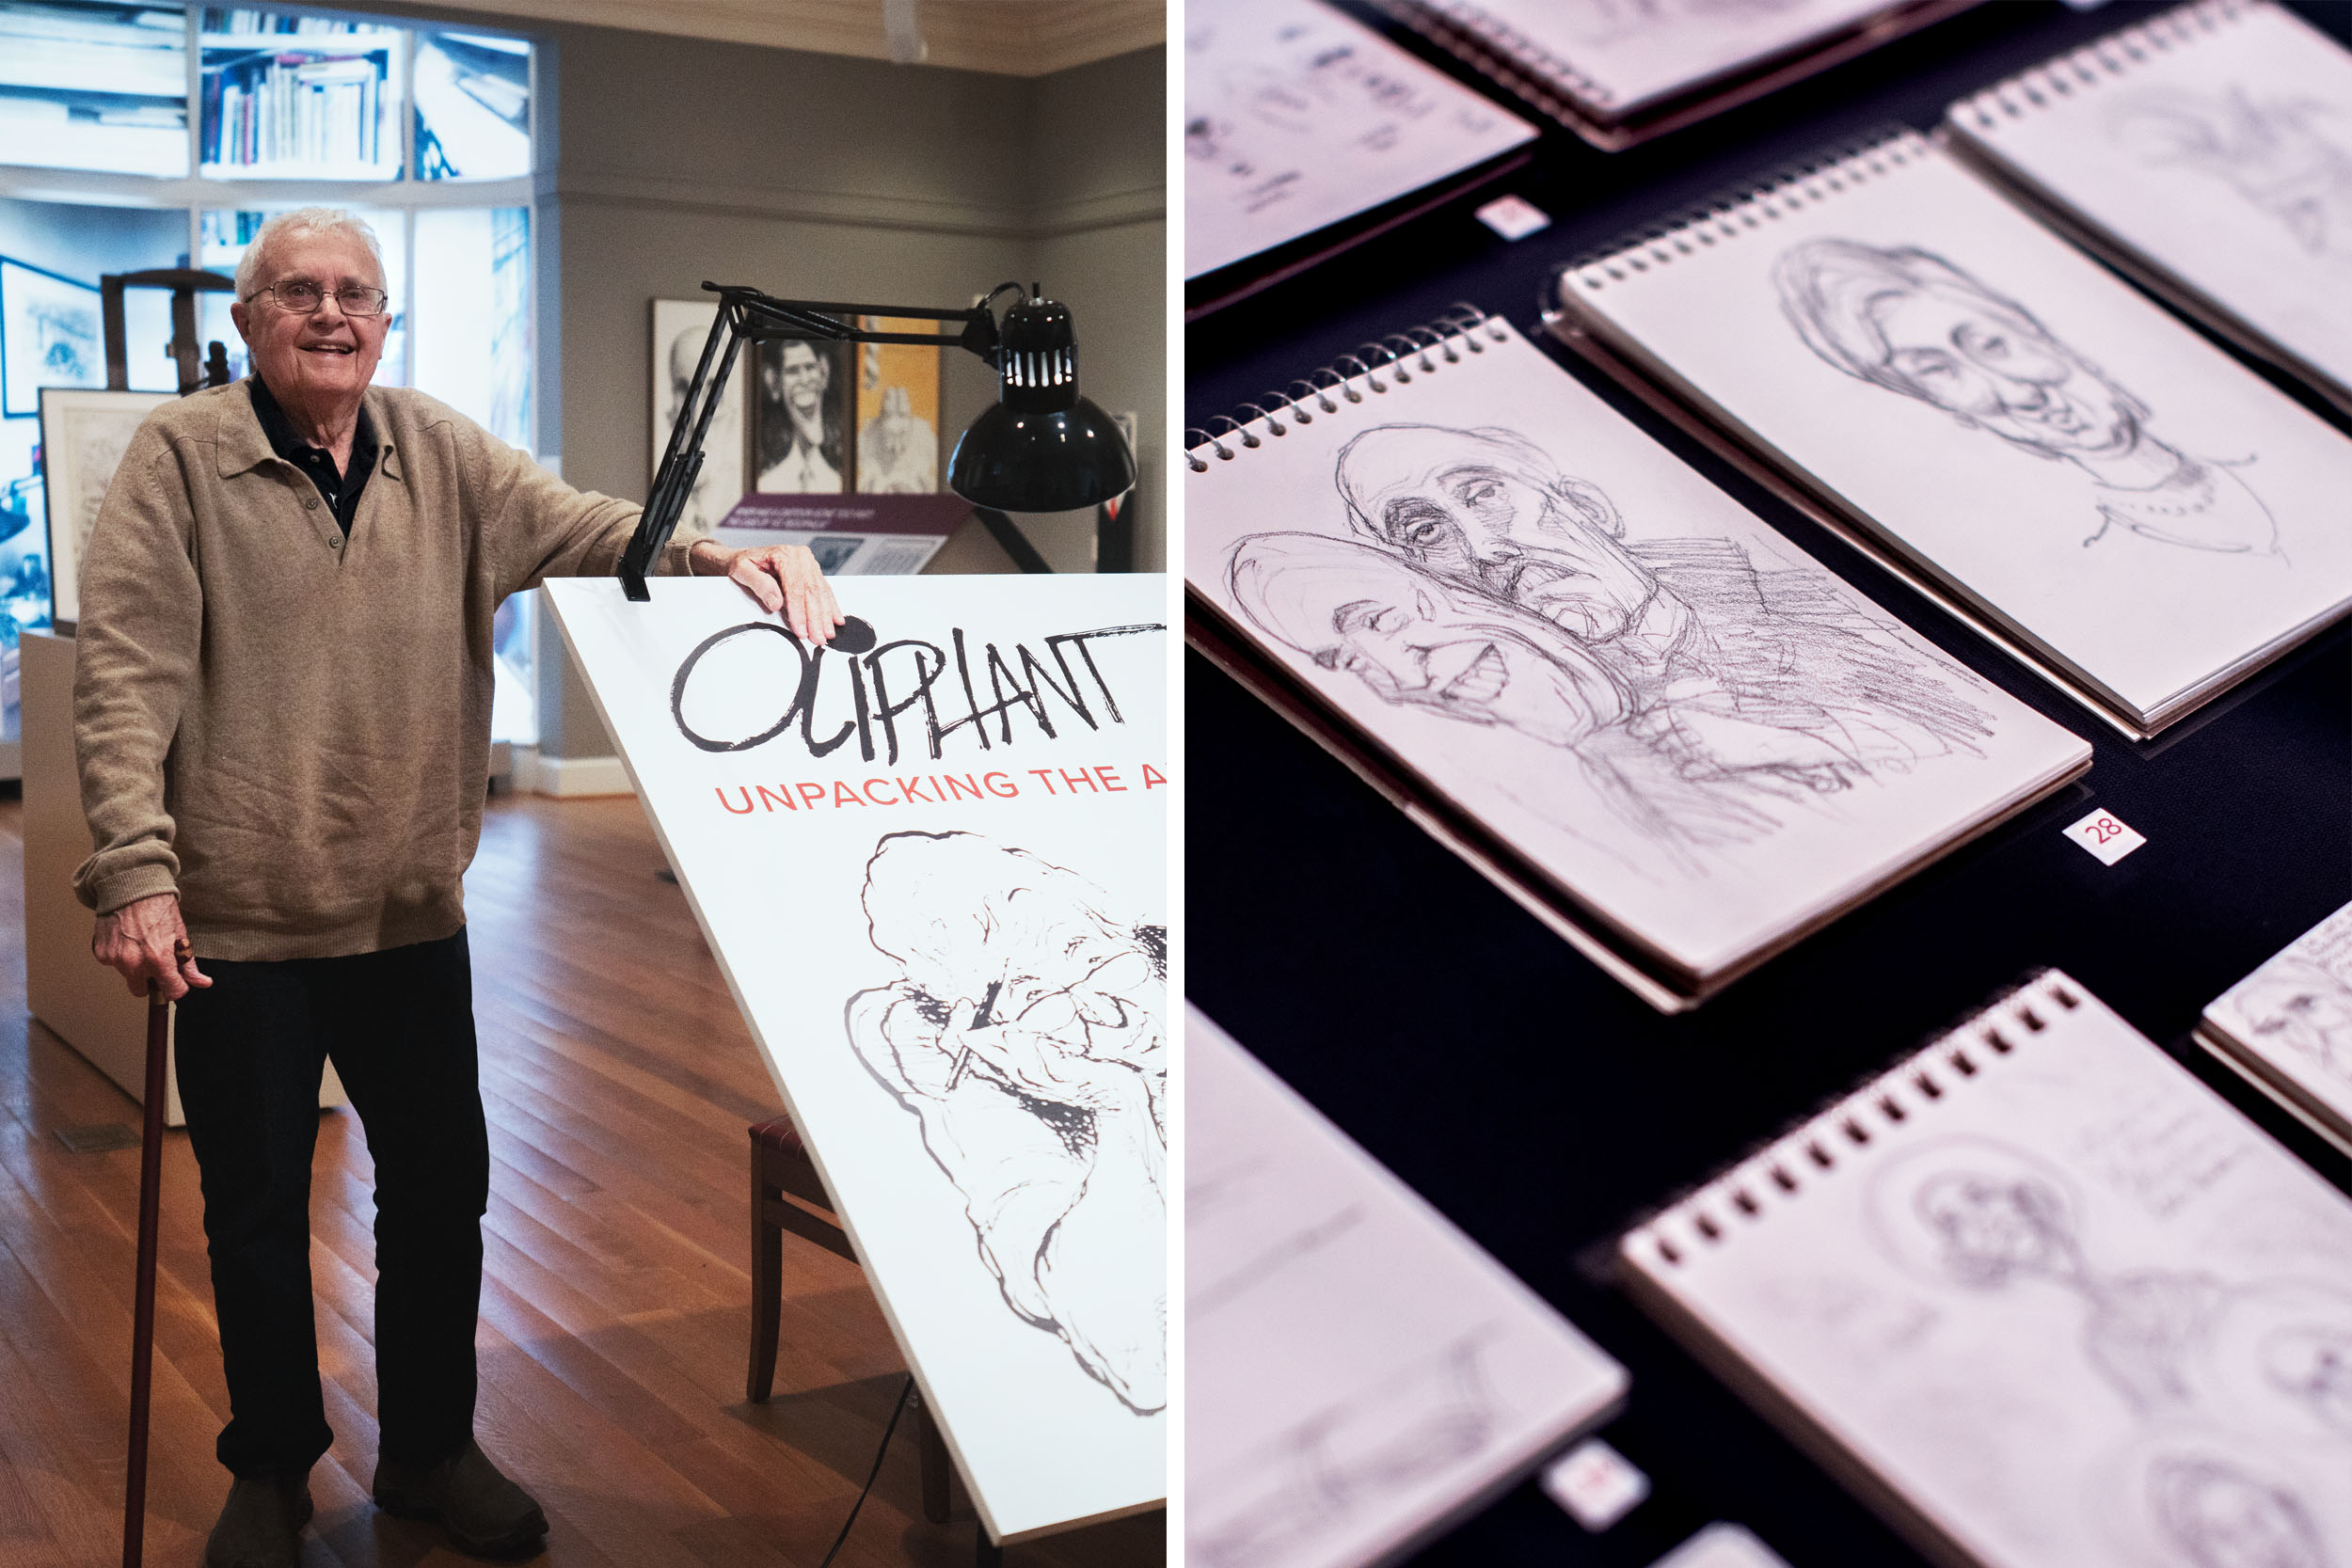 left:  Pat Oliphant standing next to a drawing. Right: examples of this drawings